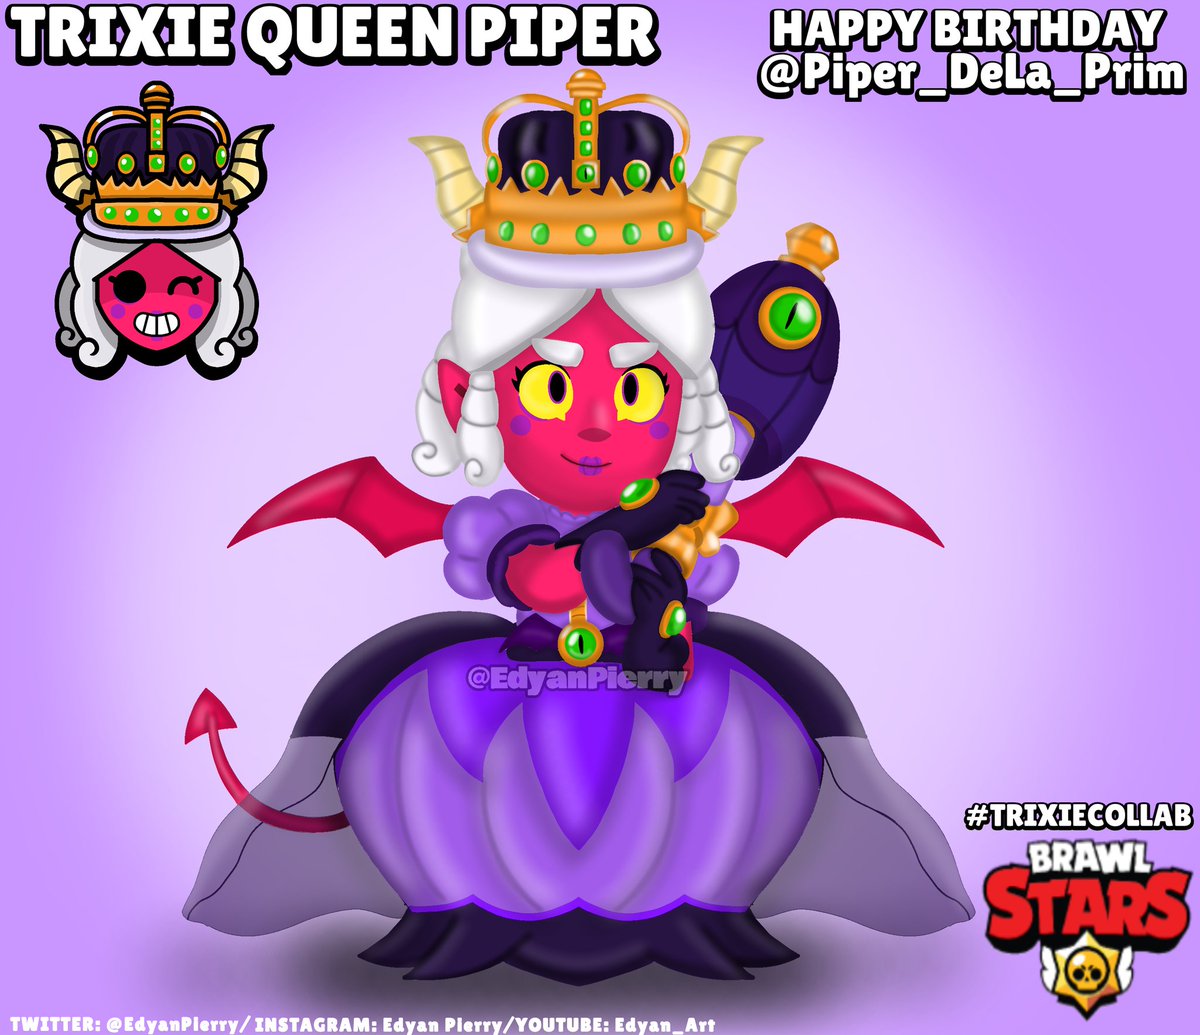 Edyan Art On Twitter Happy Birthday Piper Dela Prim My Gift To You Is A Trixie Skin For Your Favorite Brawler Piper I Hope That You Enjoyed Brawlstars Brawlart Trixiecollab Brawlstarspiper Brawlstarsart Https T Co - brawl stars skins crown